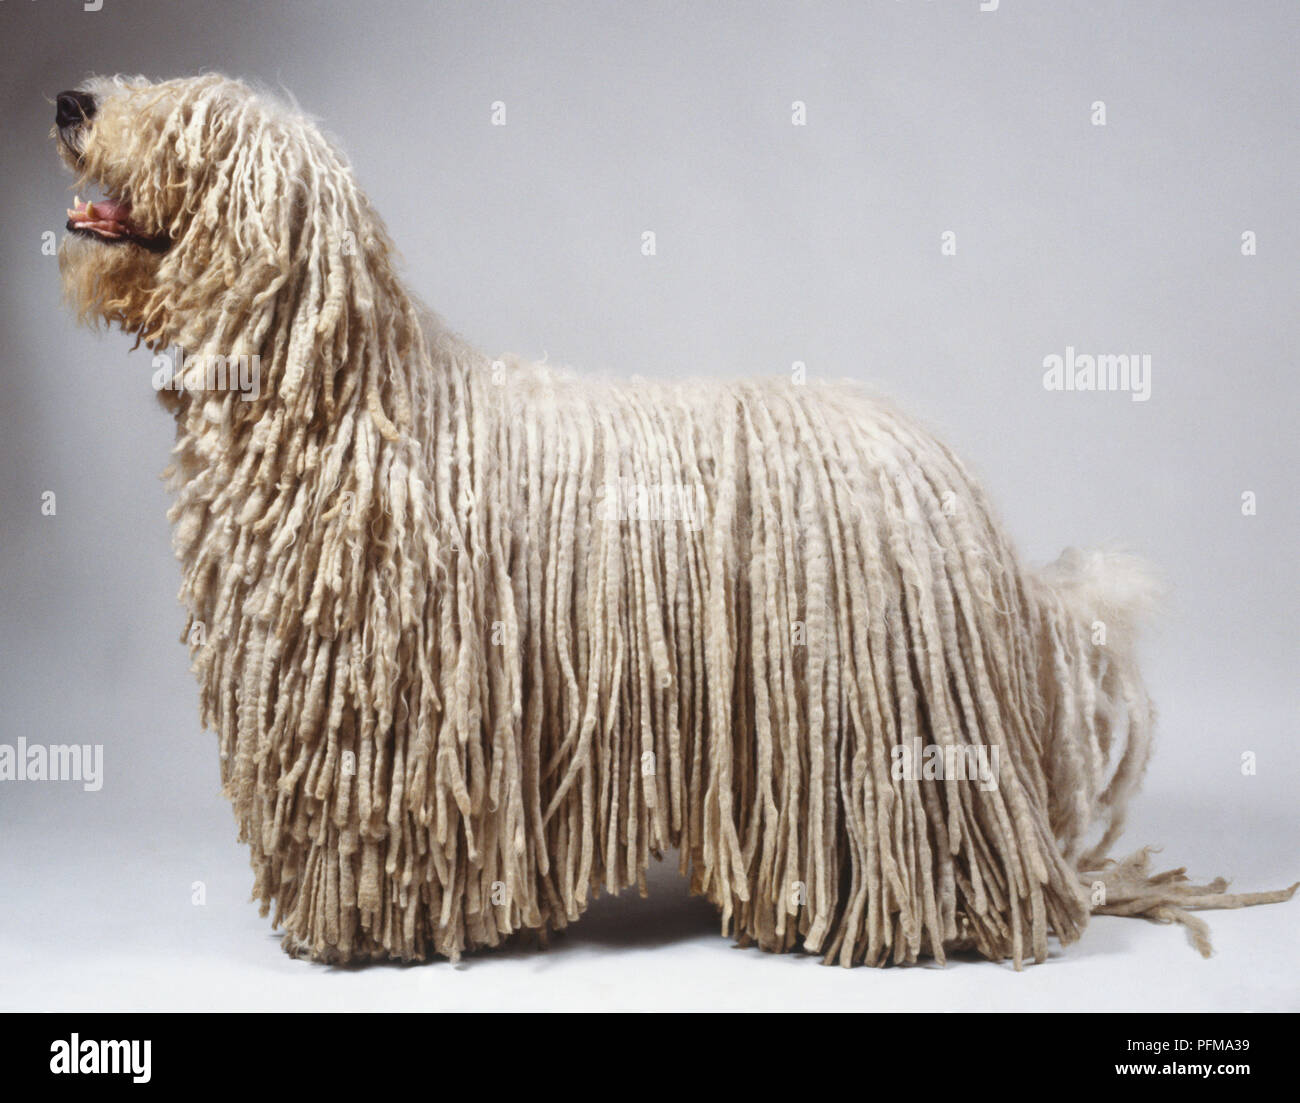 Corded Coat High Resolution Stock Photography and Images - Alamy